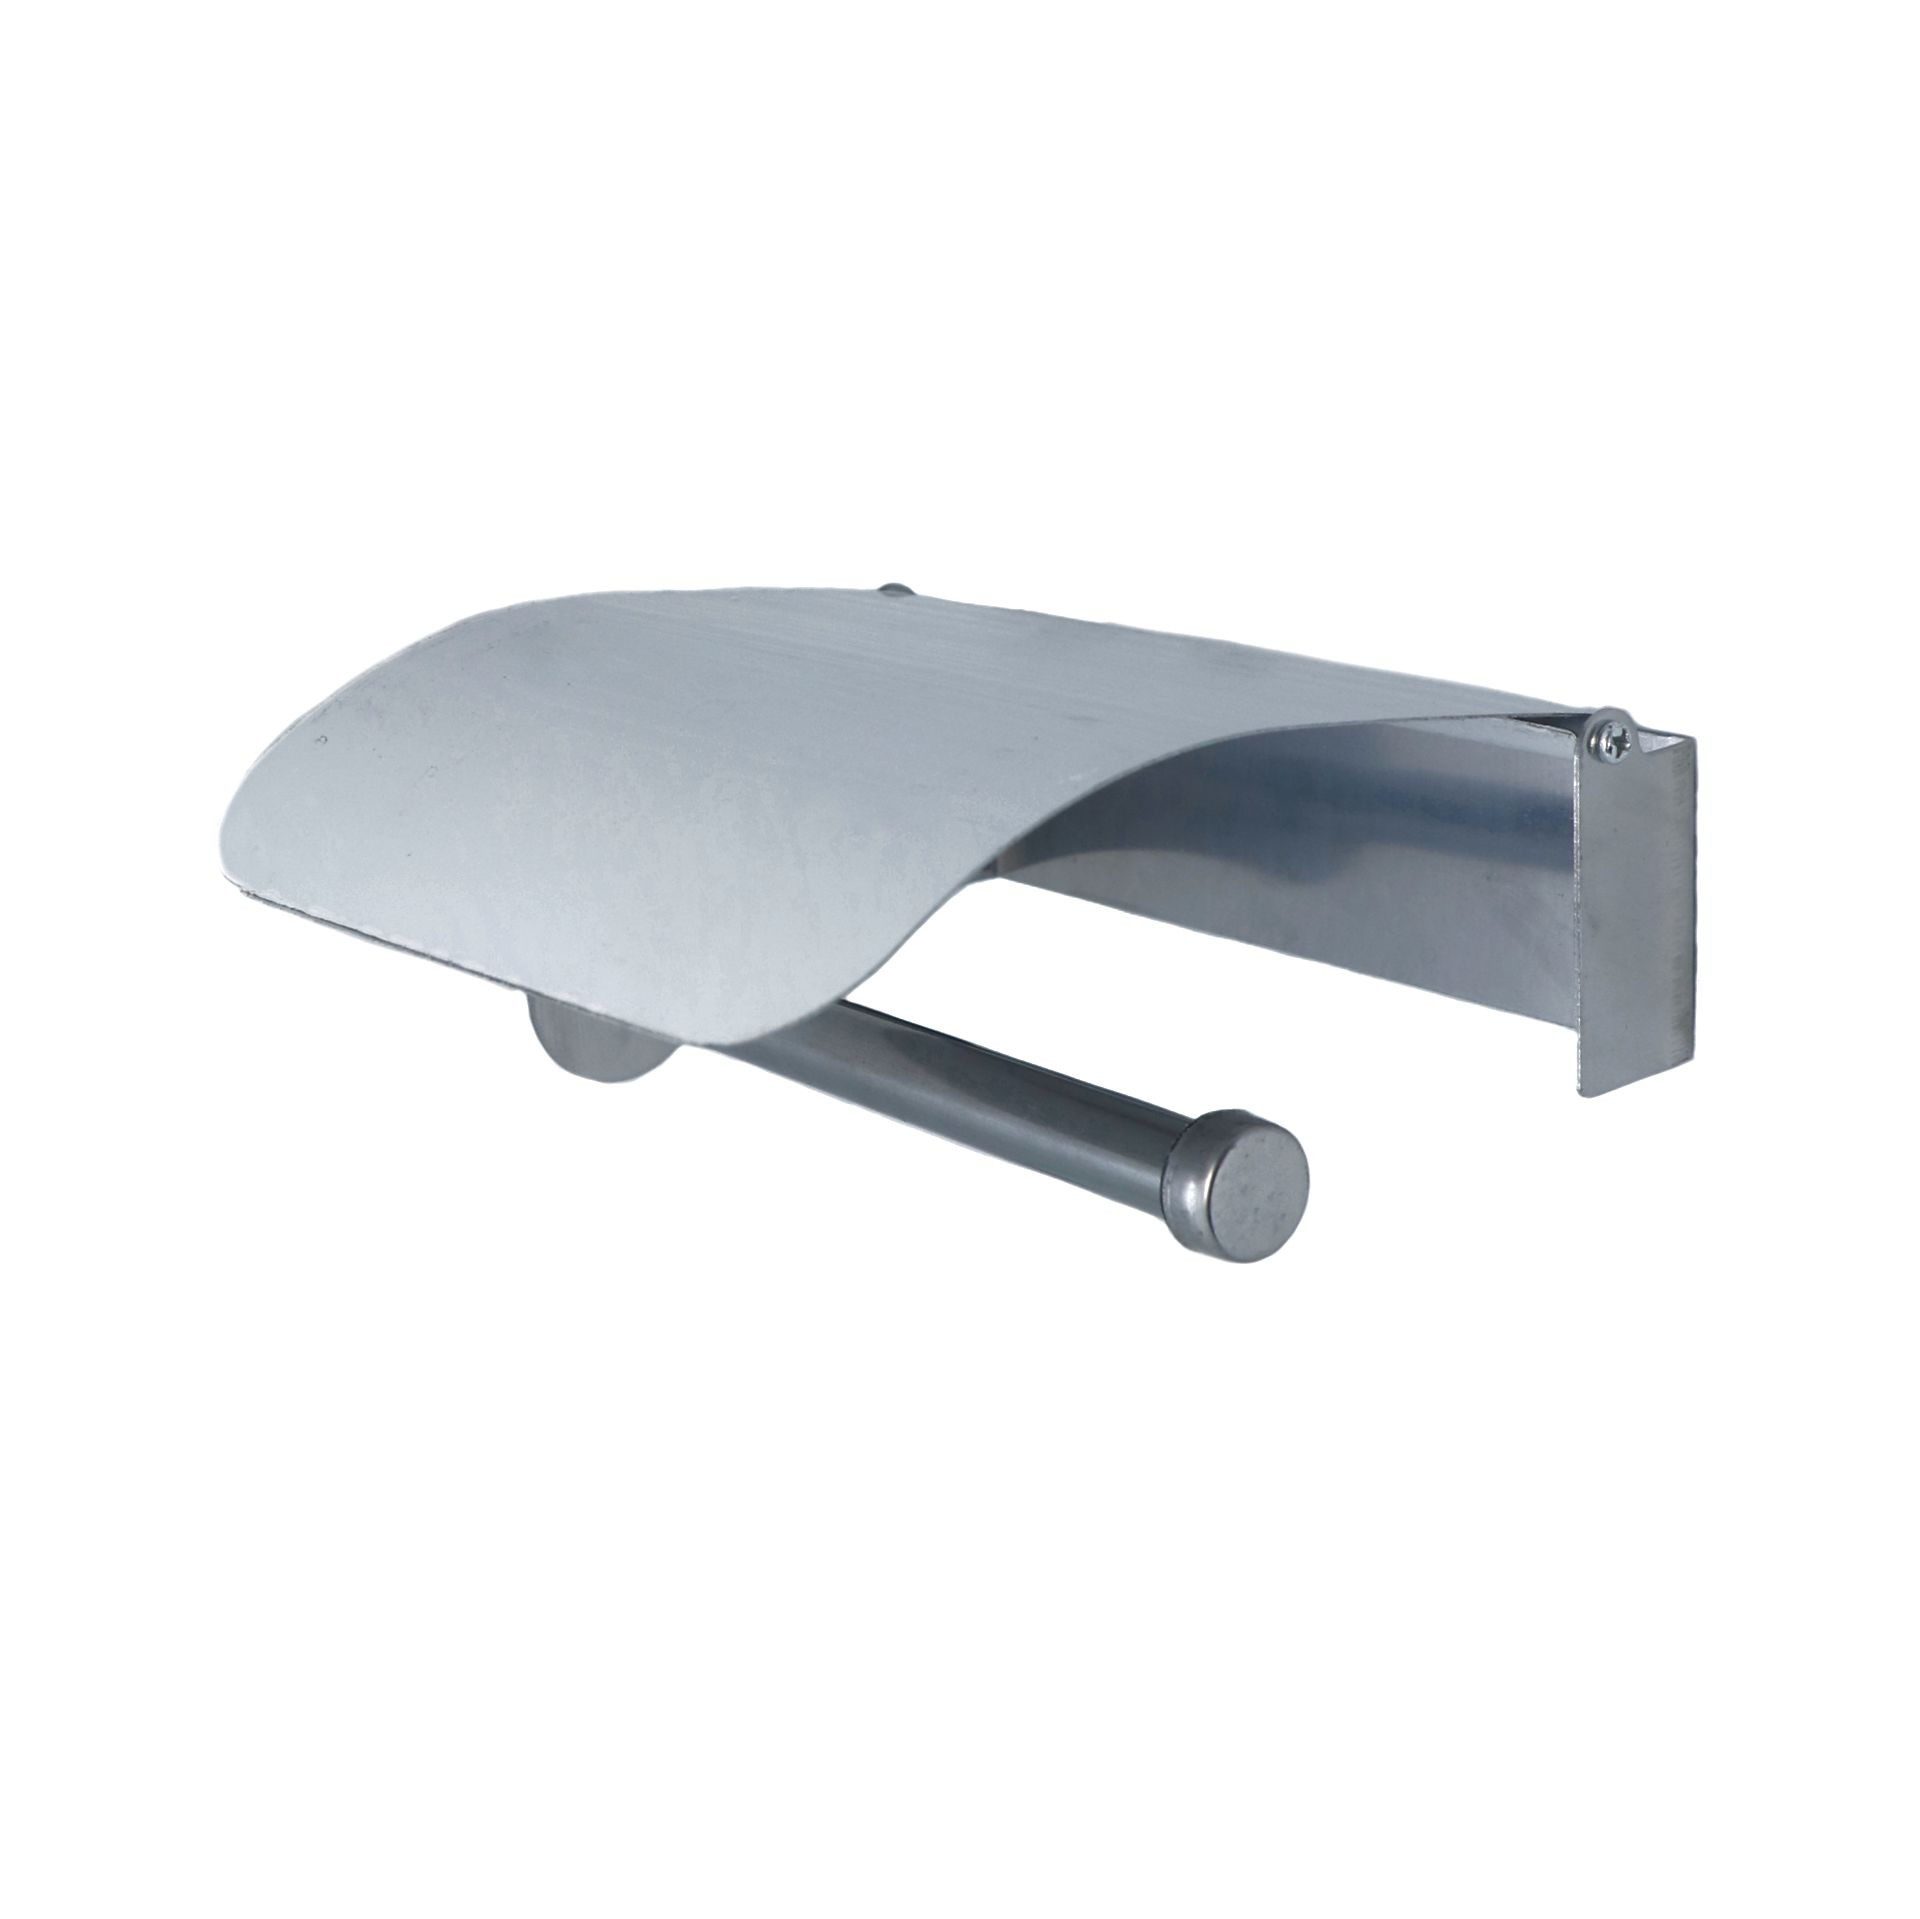 Price of Toilet Paper Holder online in Nepal. || Online Shopping in